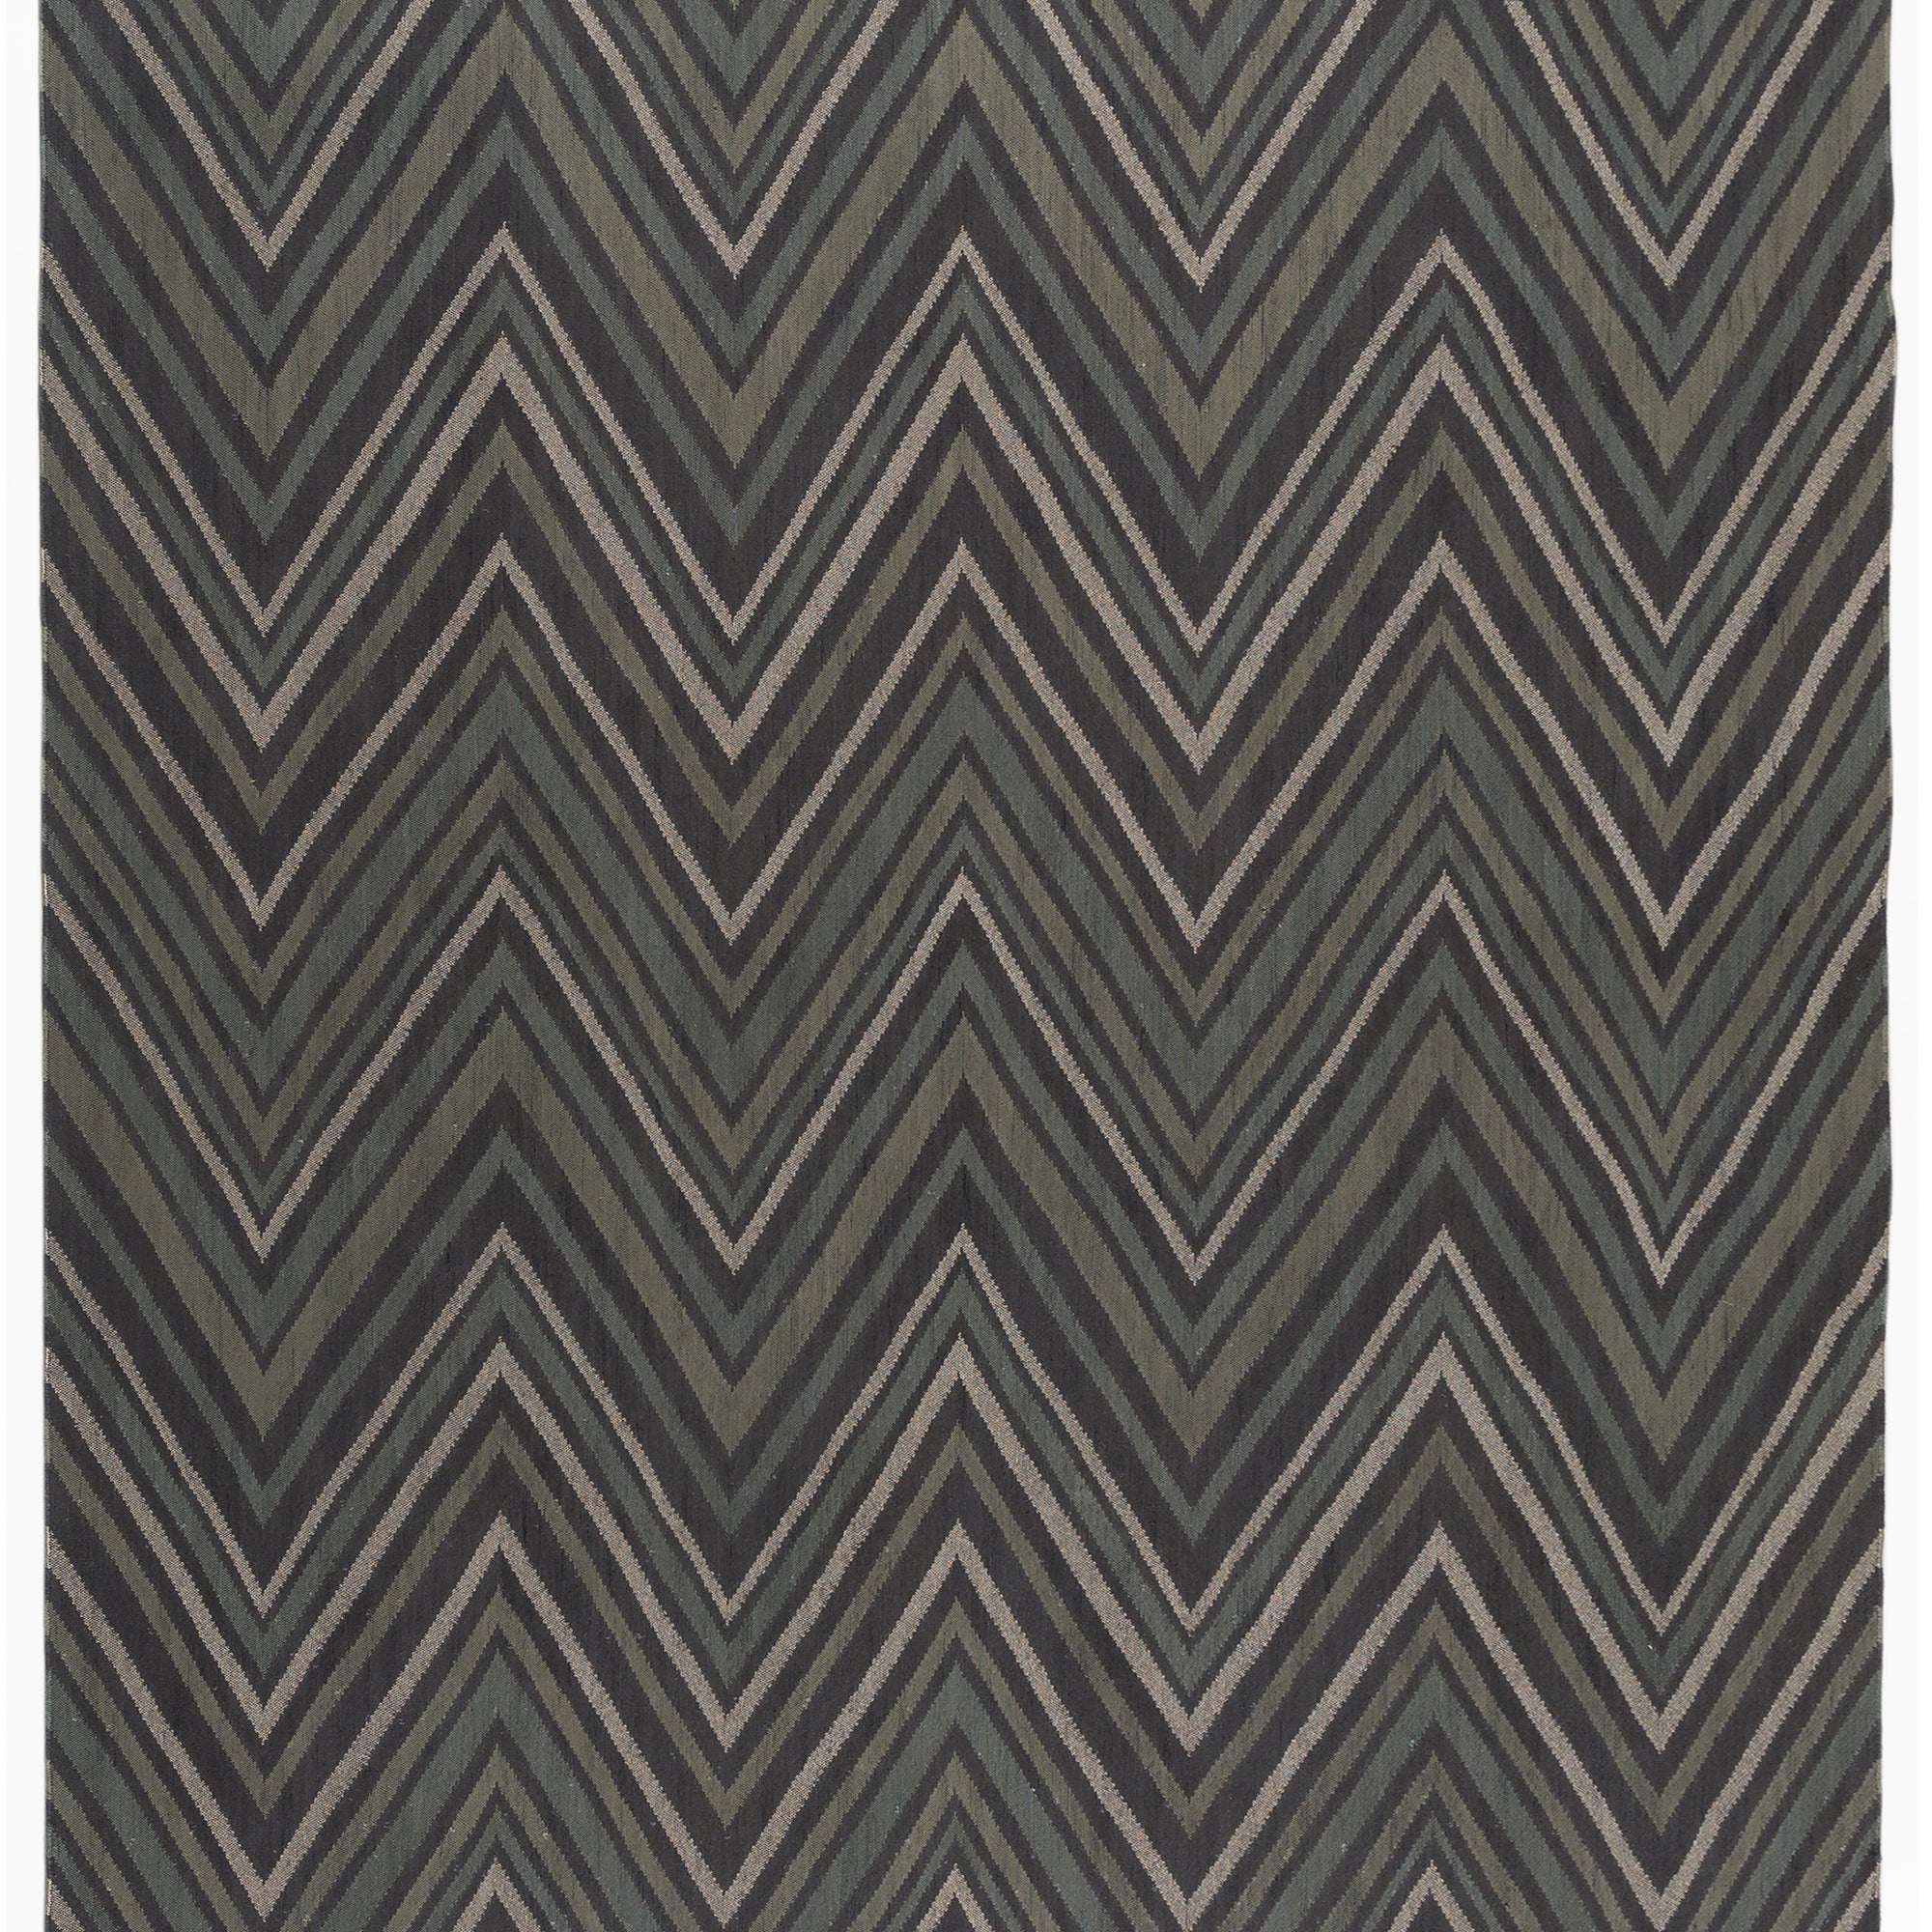 Full size To The Point Rug in Pyrite-Metallic, a zig zag pattern in dark greens, metallic ecru and black, with a mulit color tasseled edge. 